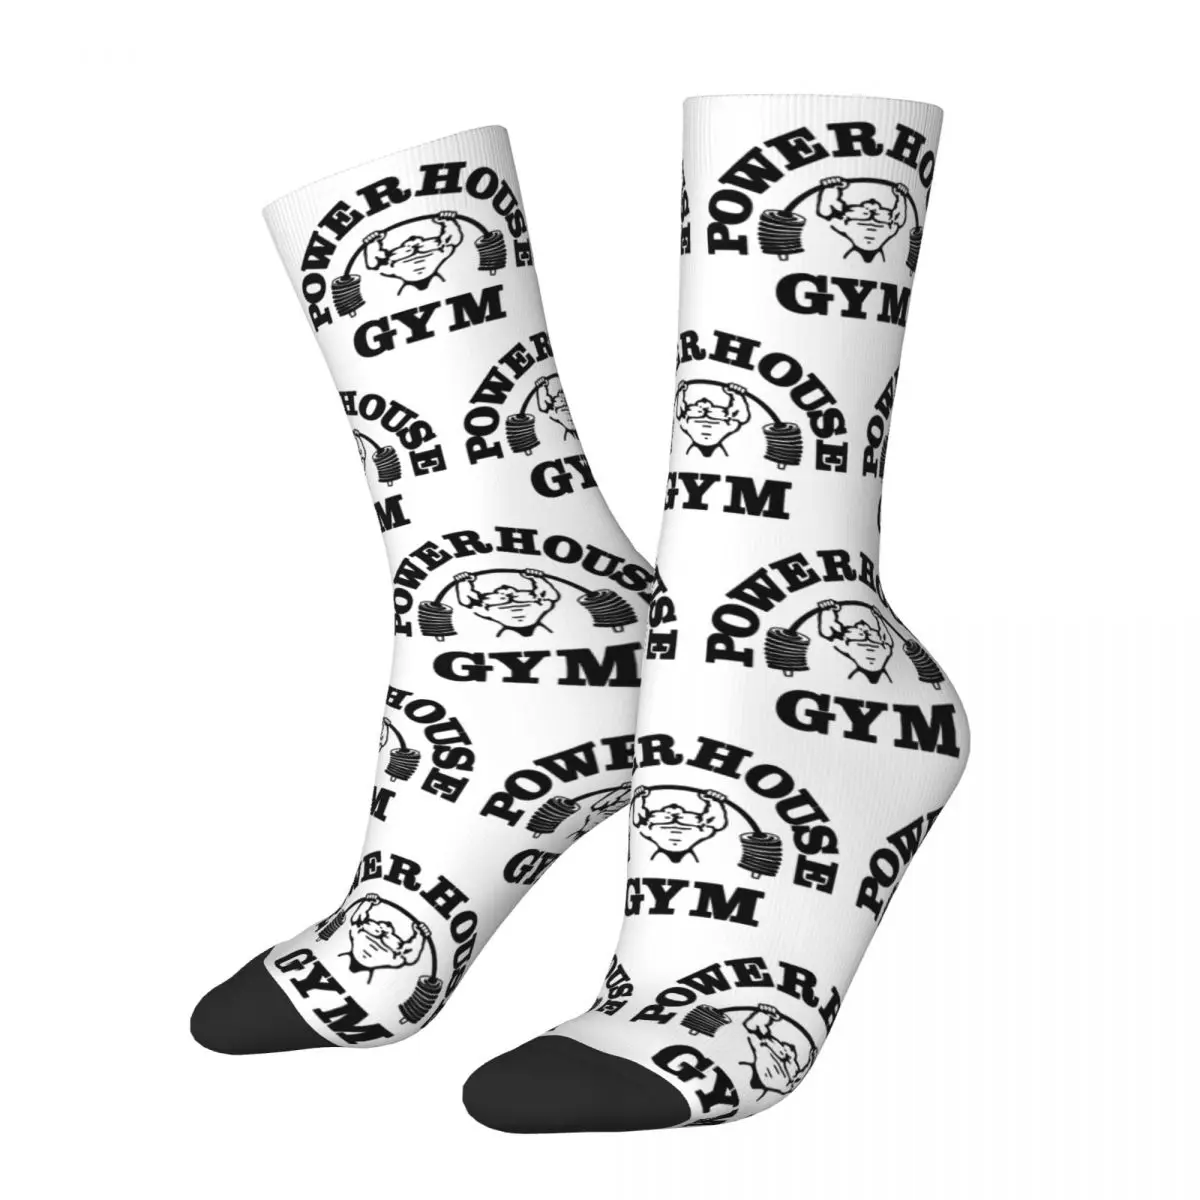 

Crew Socks Working Out Powerhouse Gym Fittness Accessories for Female Male Cozy Printed Socks All Season Best Gift Idea